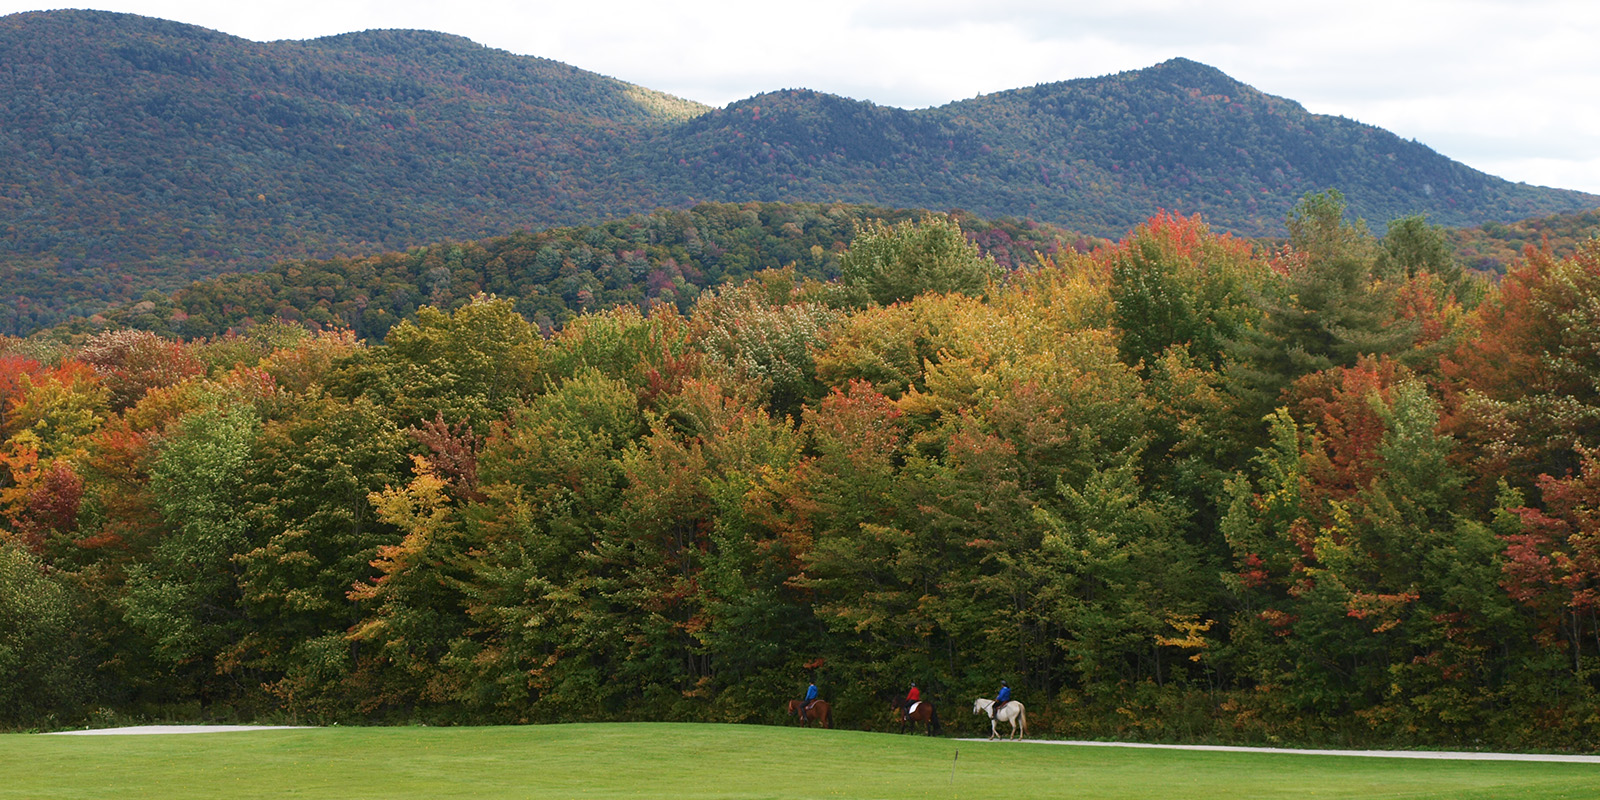 3 riders on horses along brightly colored fall woods with grass in the foreground and tree covered mountains in the background